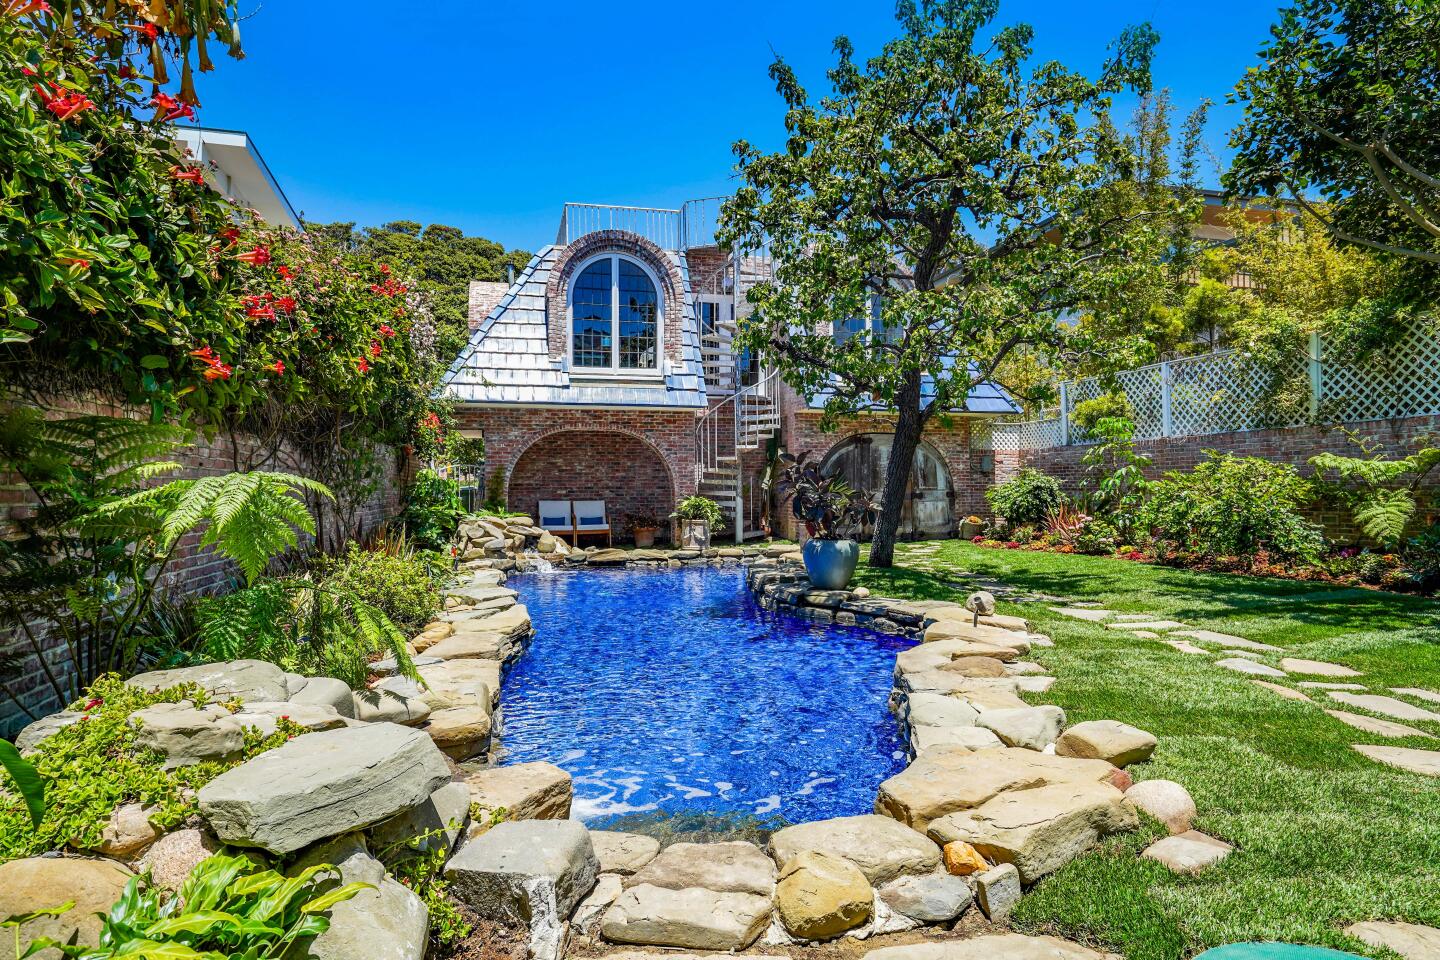 The brick beach house has landscaped grounds with a stone surrounded pool.